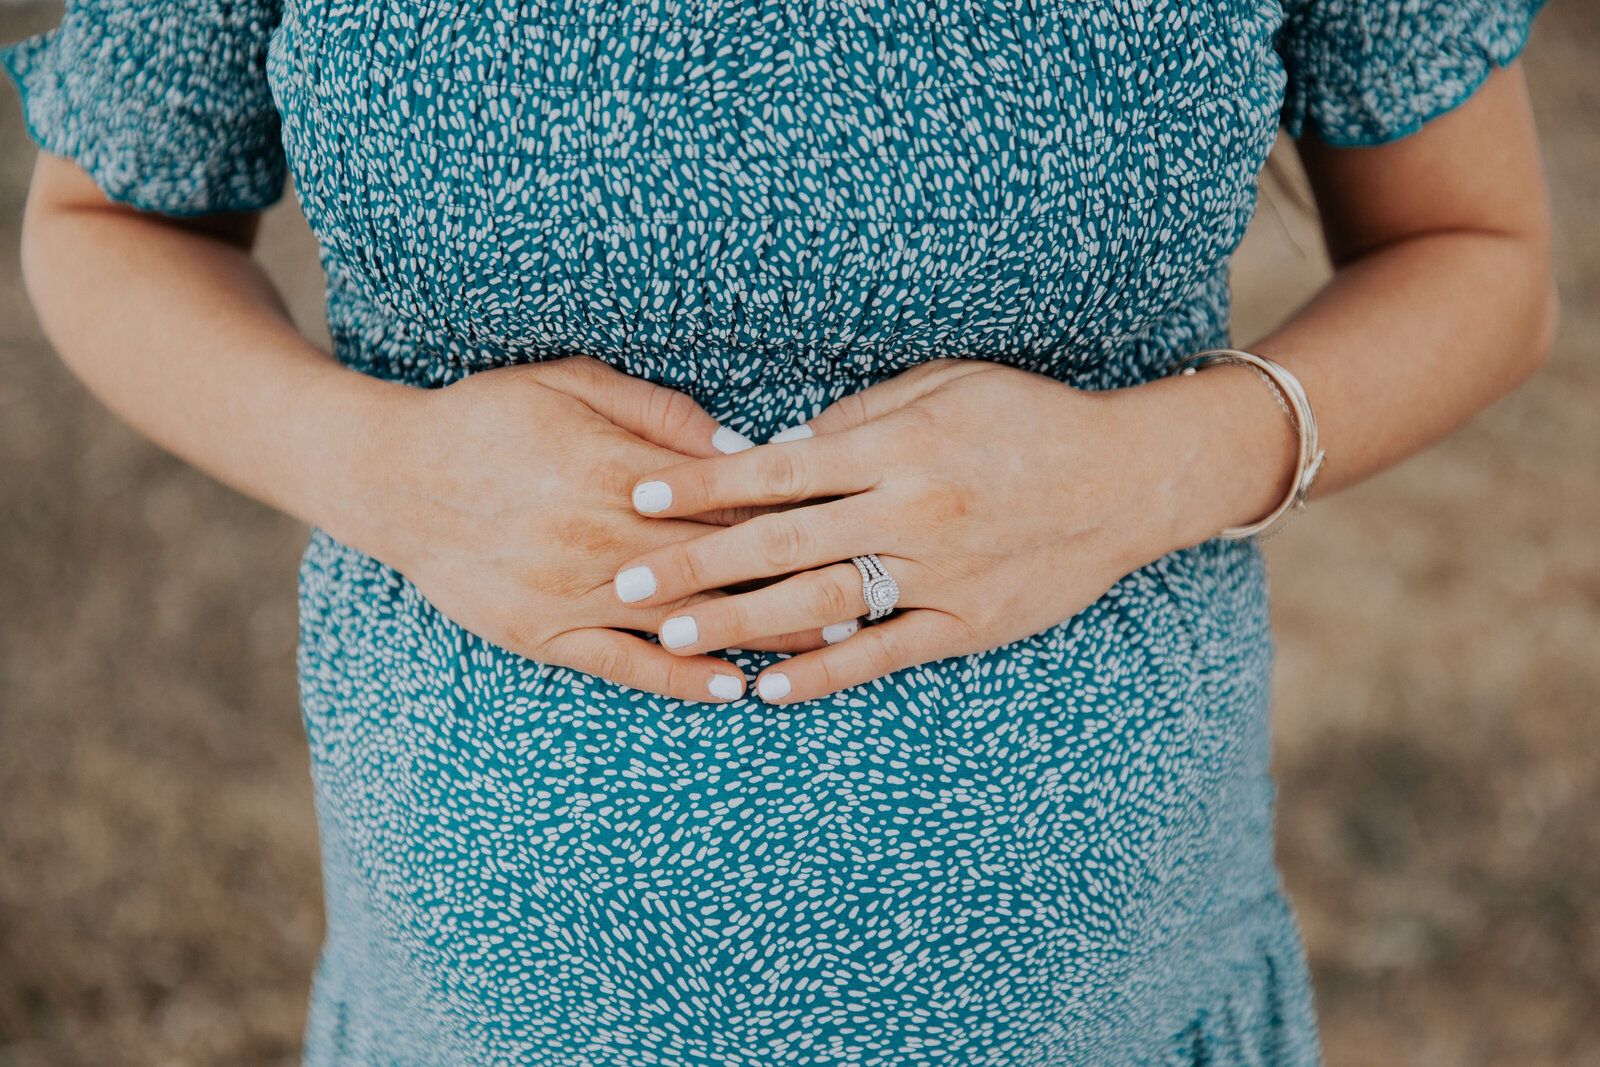 Idaho Falls maternity photographer documents the mothers baby bump while holding her hands over her tummy while wearing a blue dress